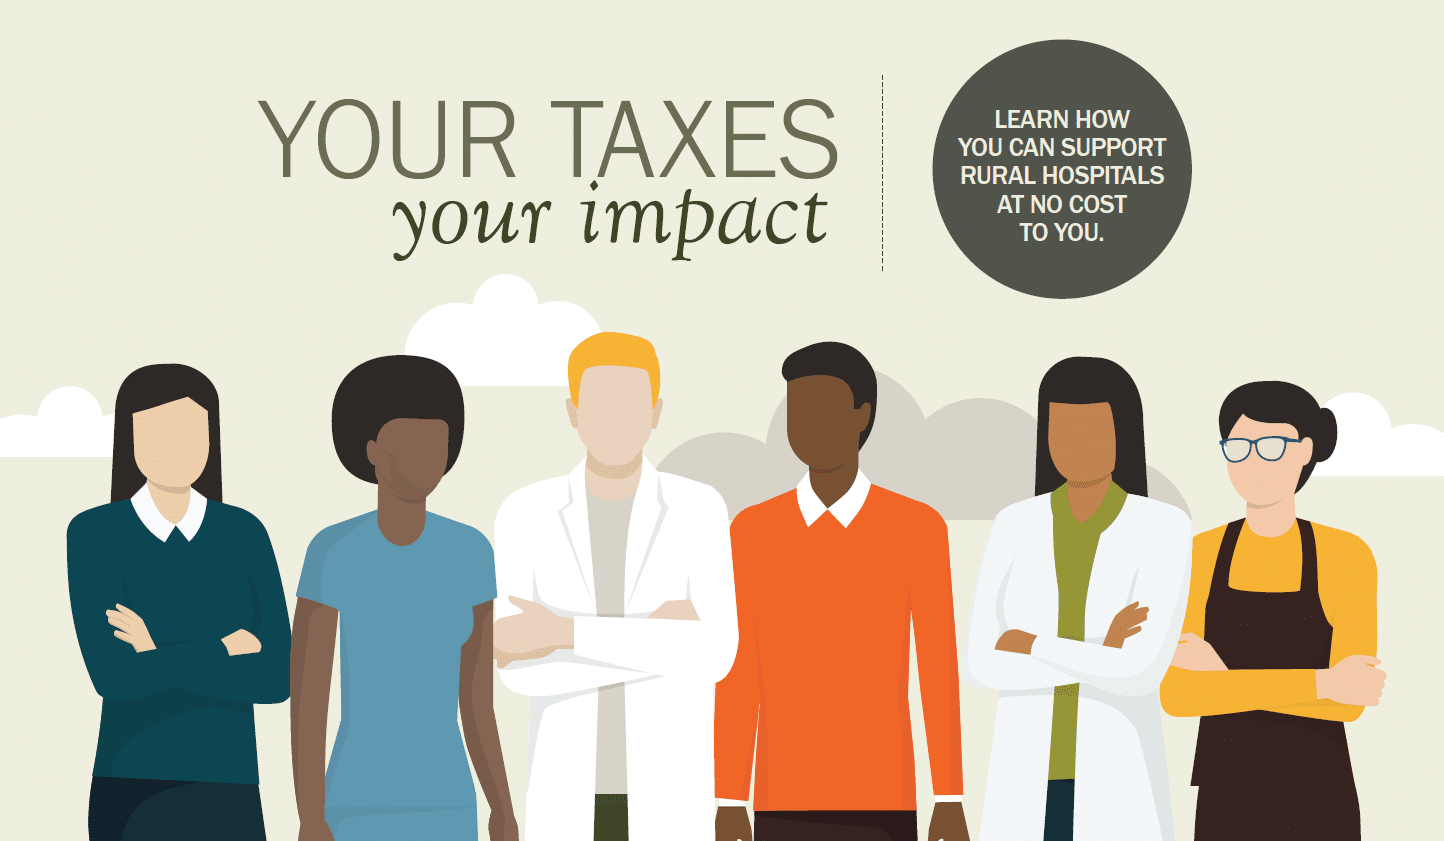 Stylized Image of Doctors and Other Professionals with the Text "Your Taxes Your Impact"